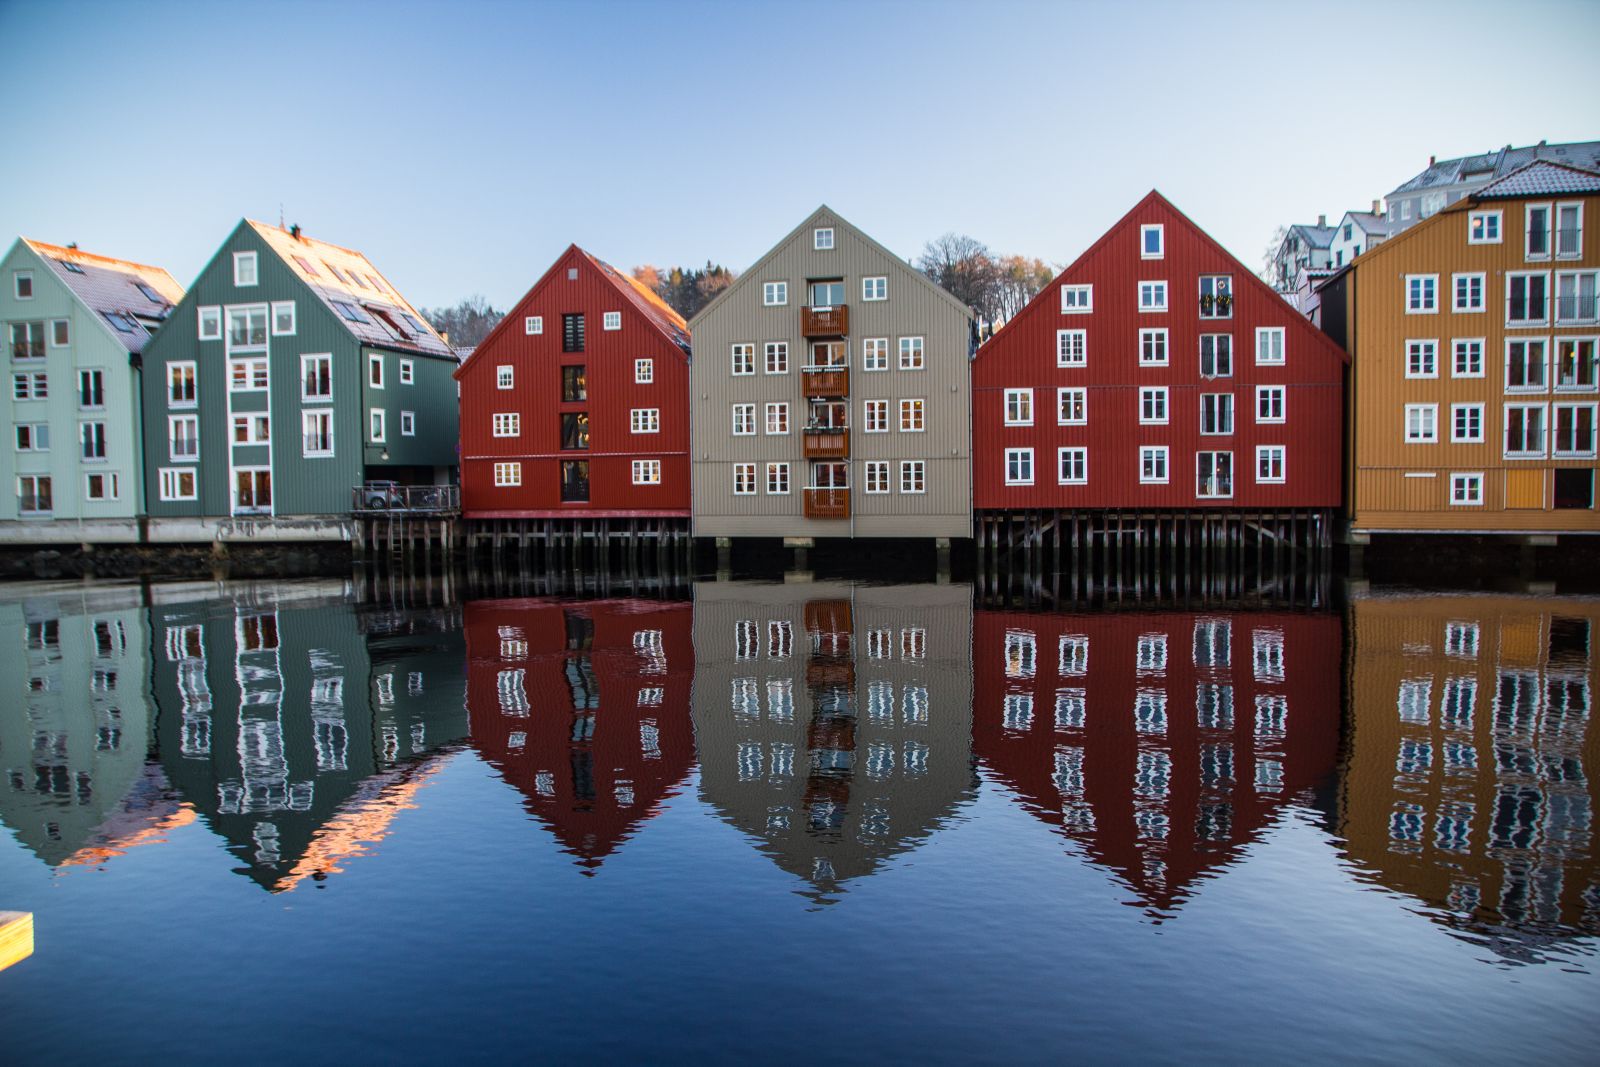 Row homes by a river in Norway